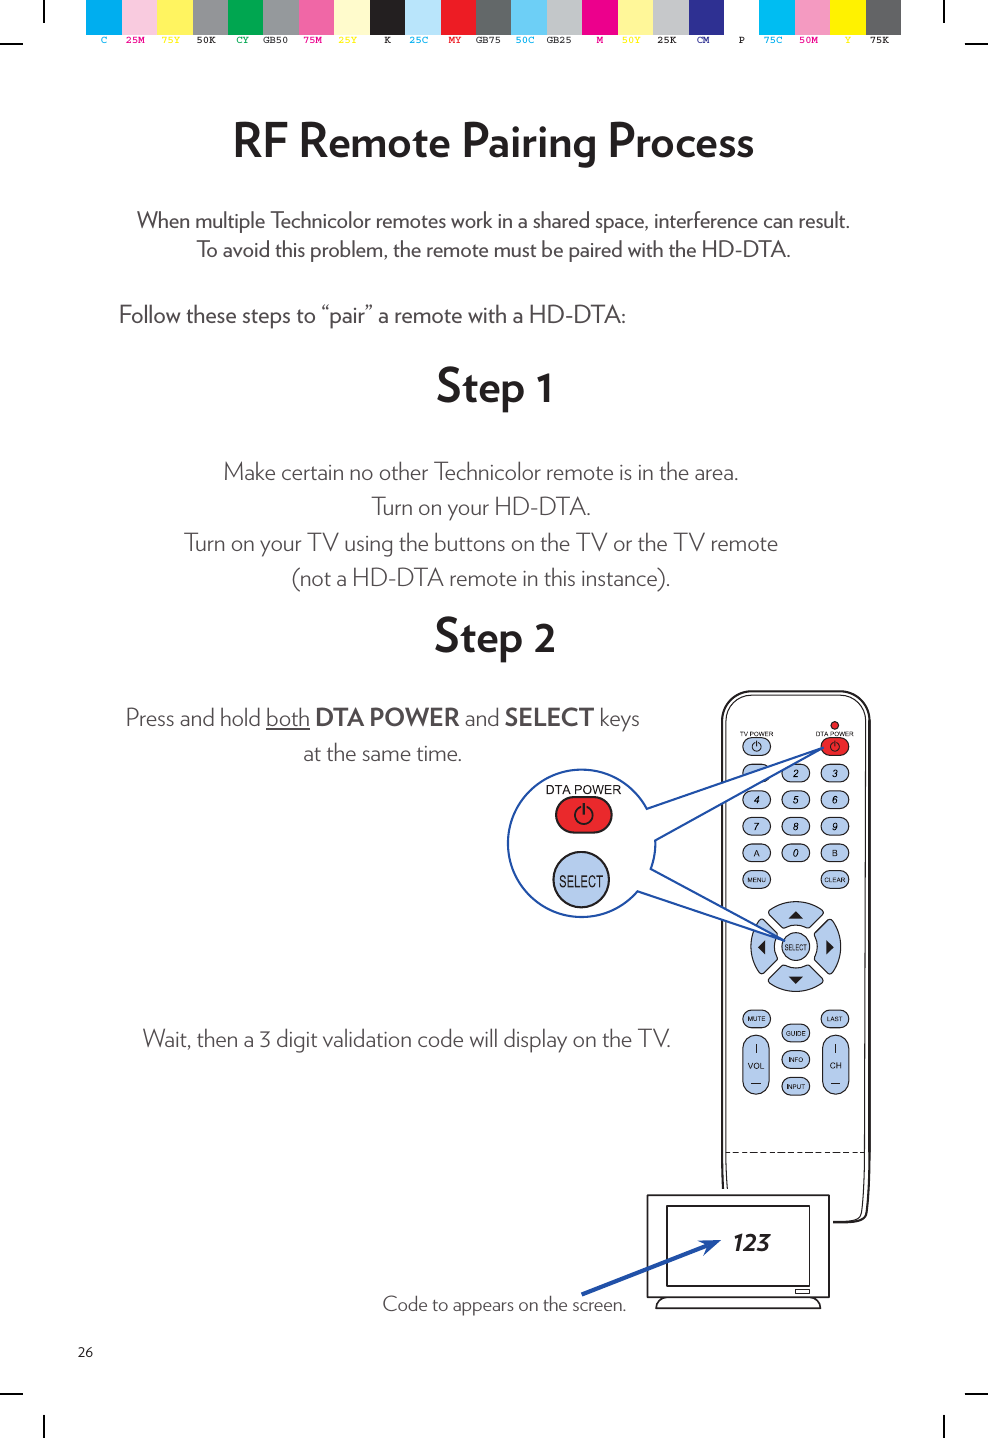 26Follow these steps to “pair” a remote with a HD-DTA:RF Remote Pairing ProcessWhen multiple Technicolor remotes work in a shared space, interference can result.To avoid this problem, the remote must be paired with the HD-DTA.Make certain no other Technicolor remote is in the area. Turn on your HD-DTA.Turn on your TV using the buttons on the TV or the TV remote  (not a HD-DTA remote in this instance).Press and hold both DTA POWER and SELECT keys at the same time. 123Code to appears on the screen.Step 1Step 2Wait, then a 3 digit validation code will display on the TV.C25M 75Y 50K CY GB50 75M 25Y K25C MY GB75 50C GB25 M50Y 25K CM P75C 50M Y75K